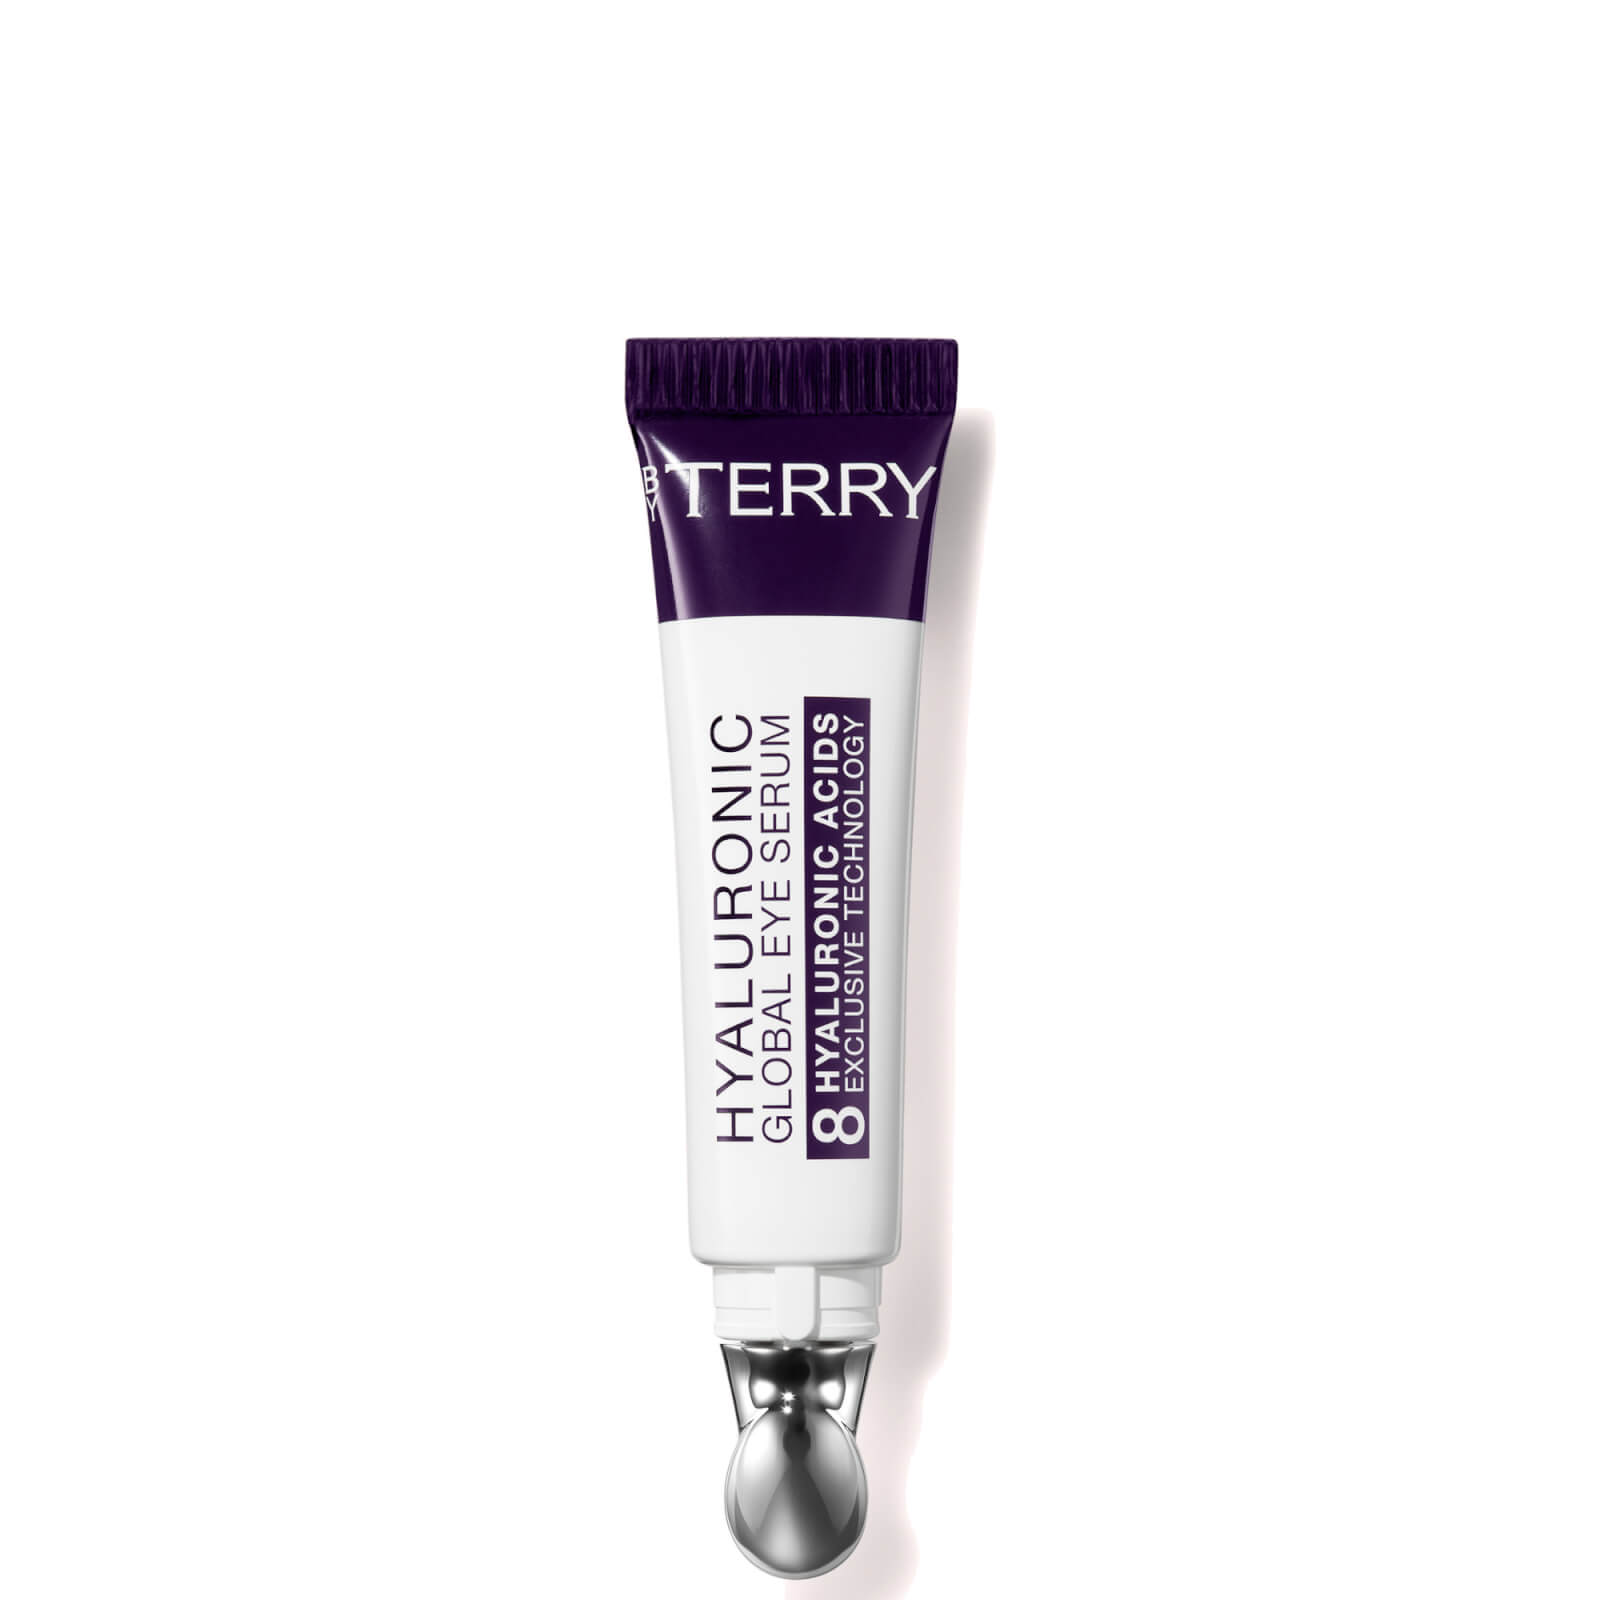 Photos - Cream / Lotion By Terry Hyaluronic Global Eye Serum 15ml 